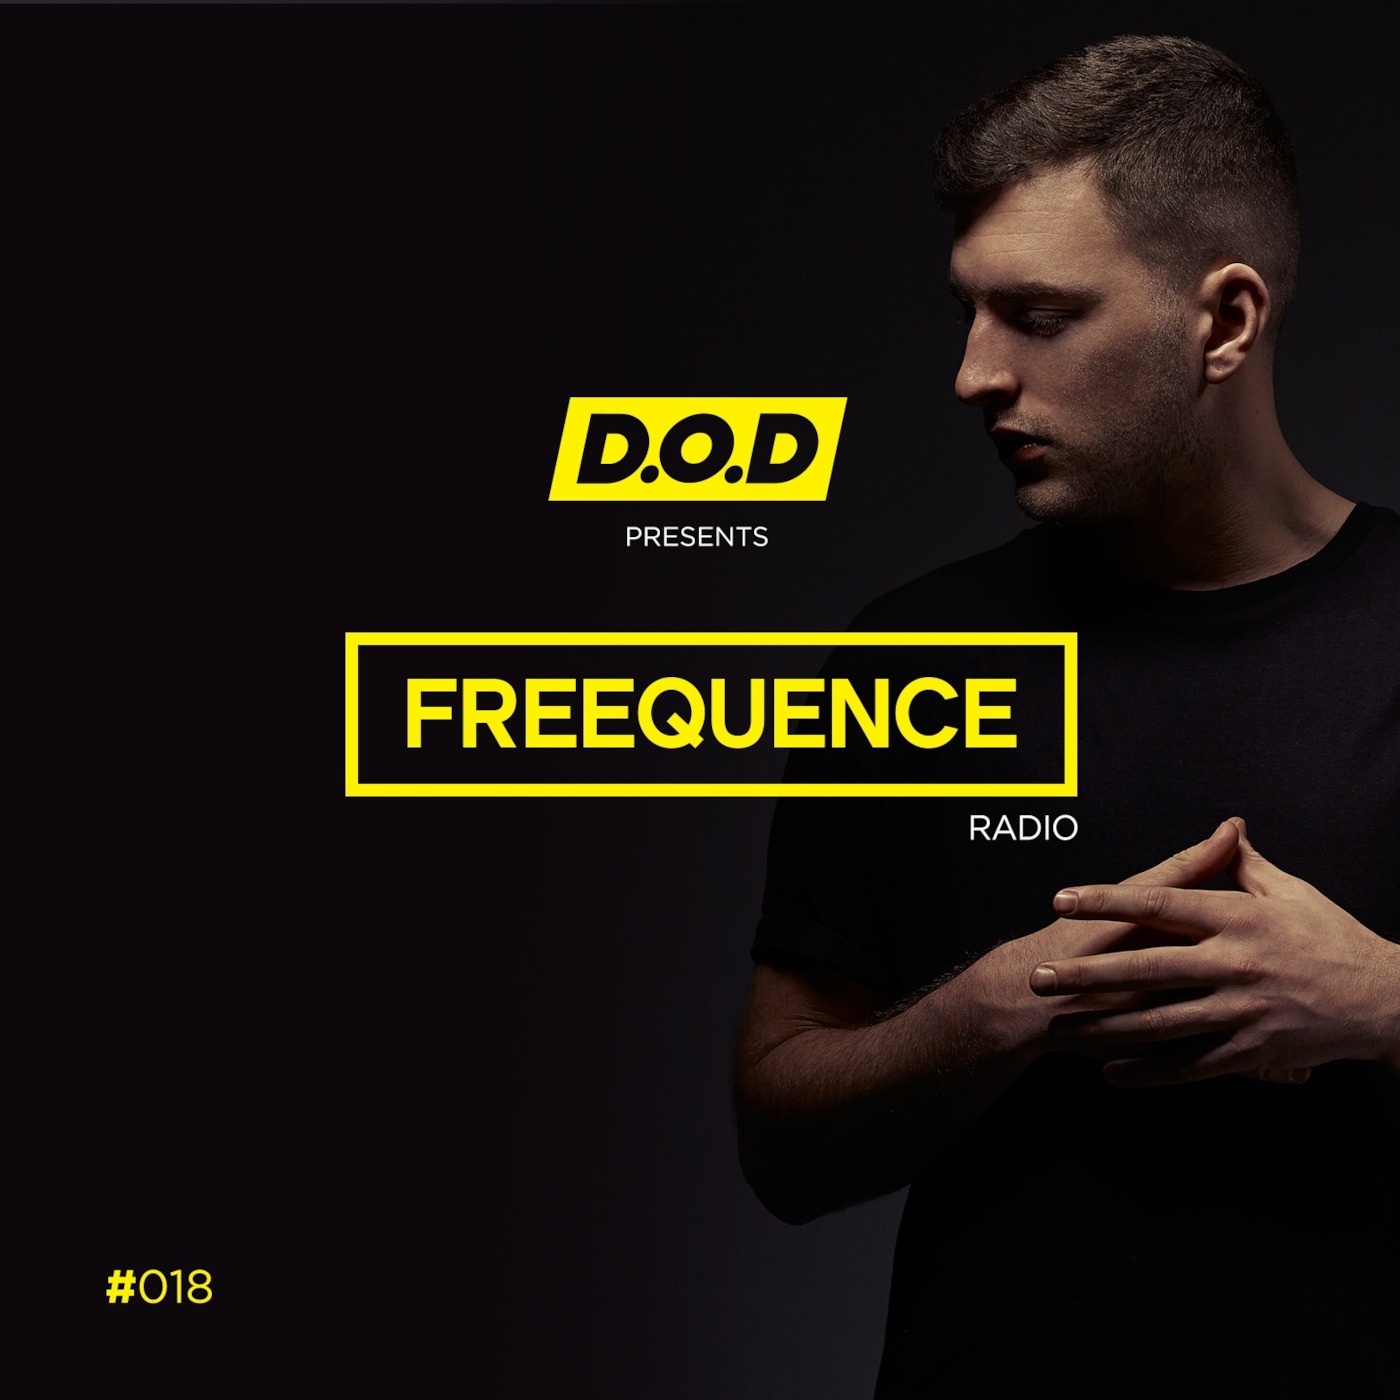 #FREEQUENCE Radio with D.O.D #018